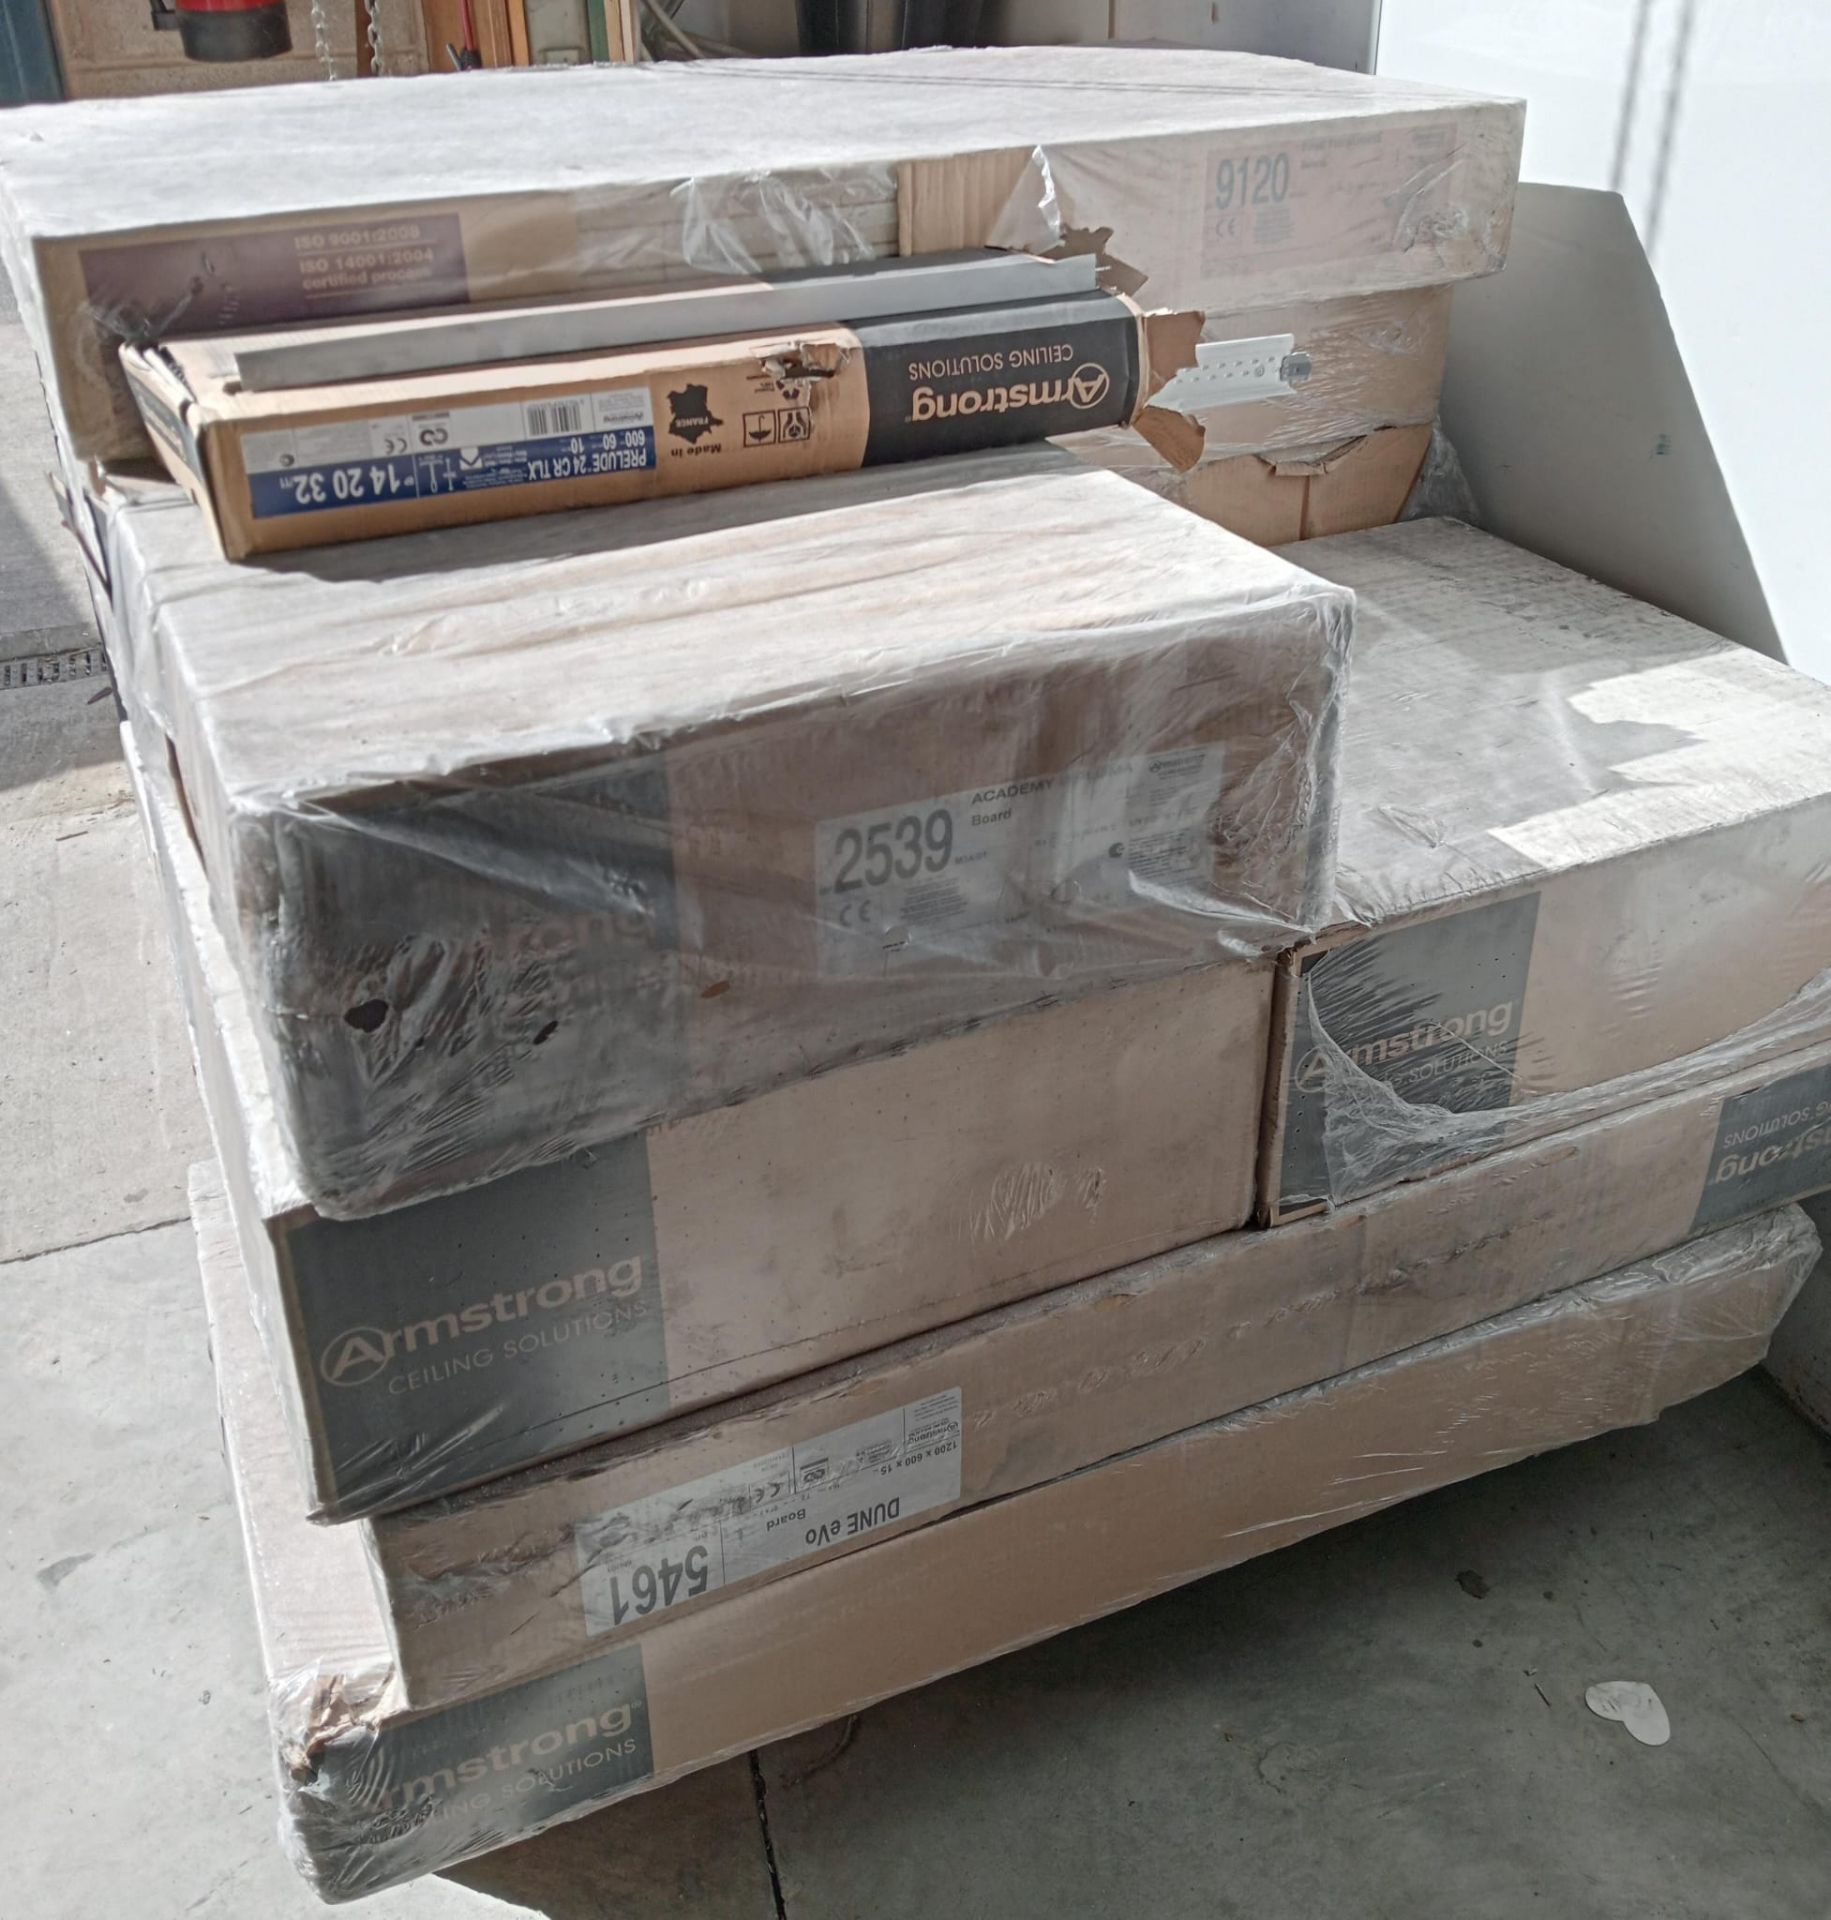 JOBLOT OF ARMSTRONG ACOUSTIC CEILING TILES INC 5461, 9120 AND 2539 - GRADE B - Bild 2 aus 7